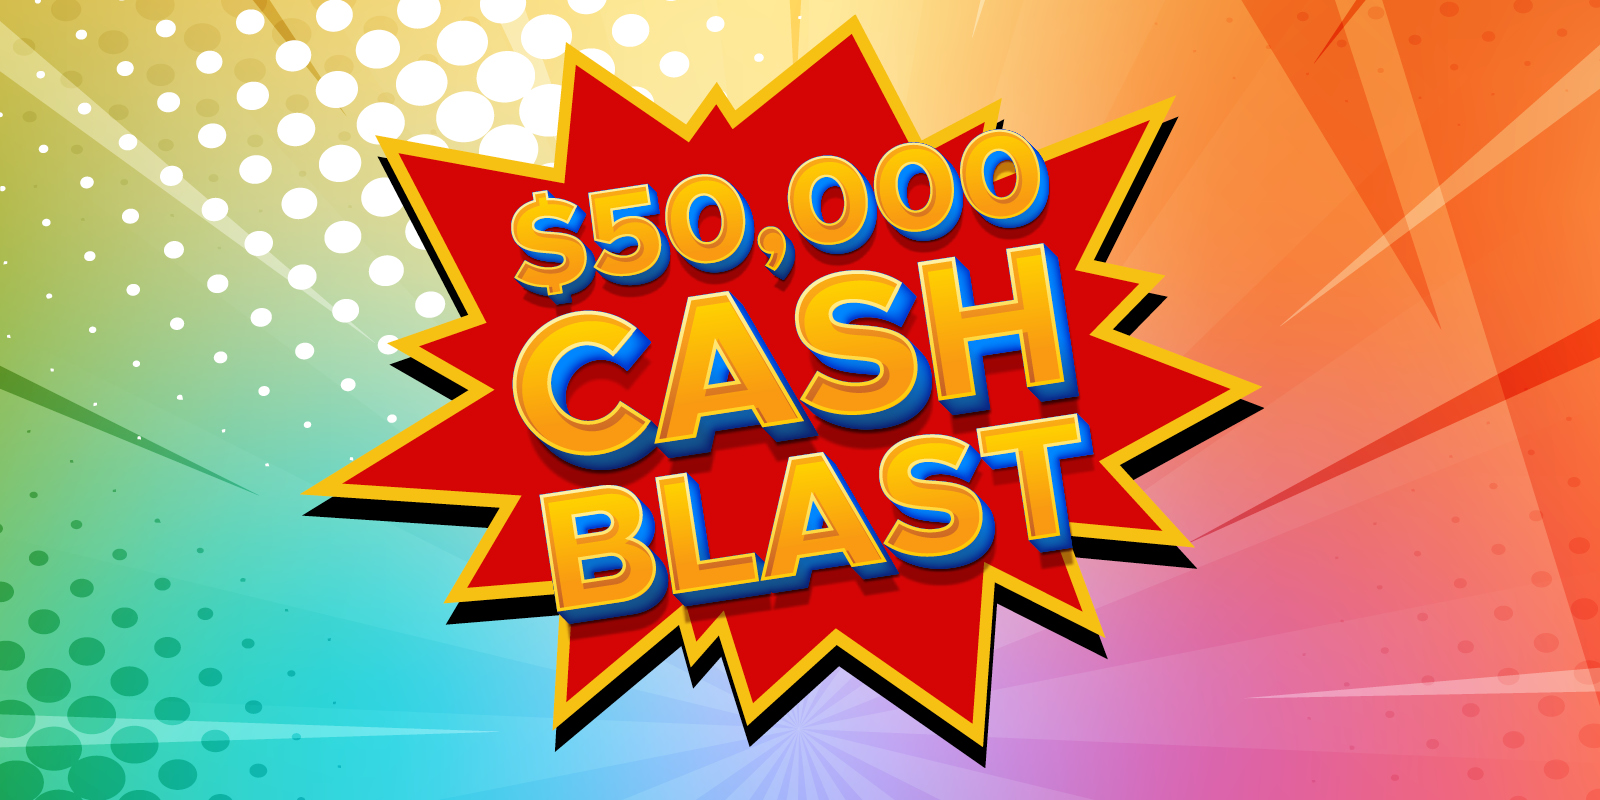 $50,000 Cash Blast Drawings creative with a pop art look and feel